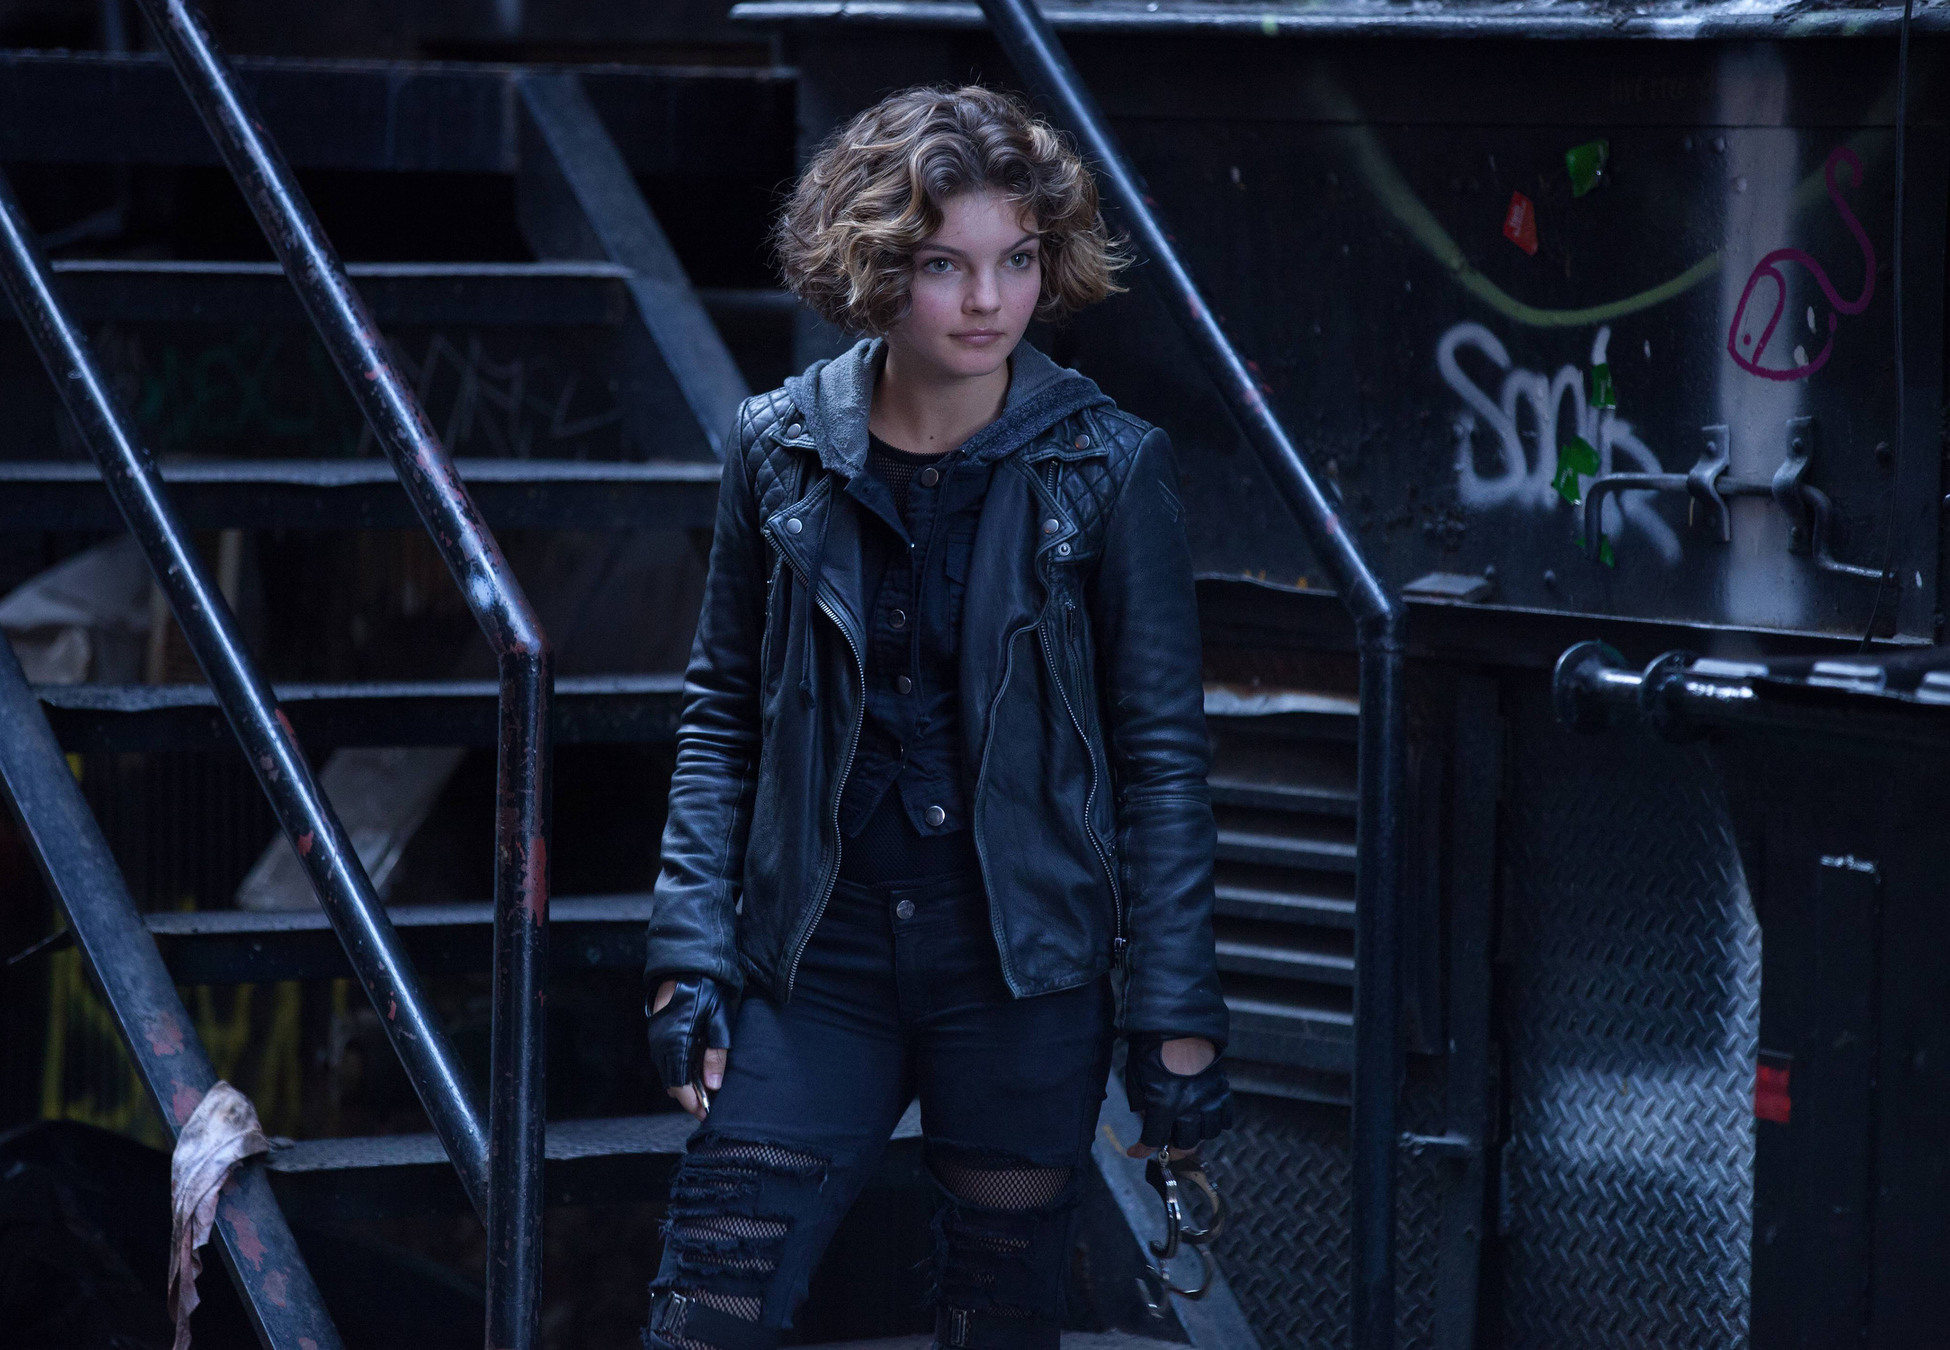 GOTHAM: Selina Kyle (Camren Bicondova) escapes from handcuffs in the "The Balloonman" episode of GOTHAM airing Monday, Oct. 6 (8:00-9:00 PM ET/PT) on FOX. Â©2014 Fox Broadcasting Co. Cr: Jessica Miglio/FOX